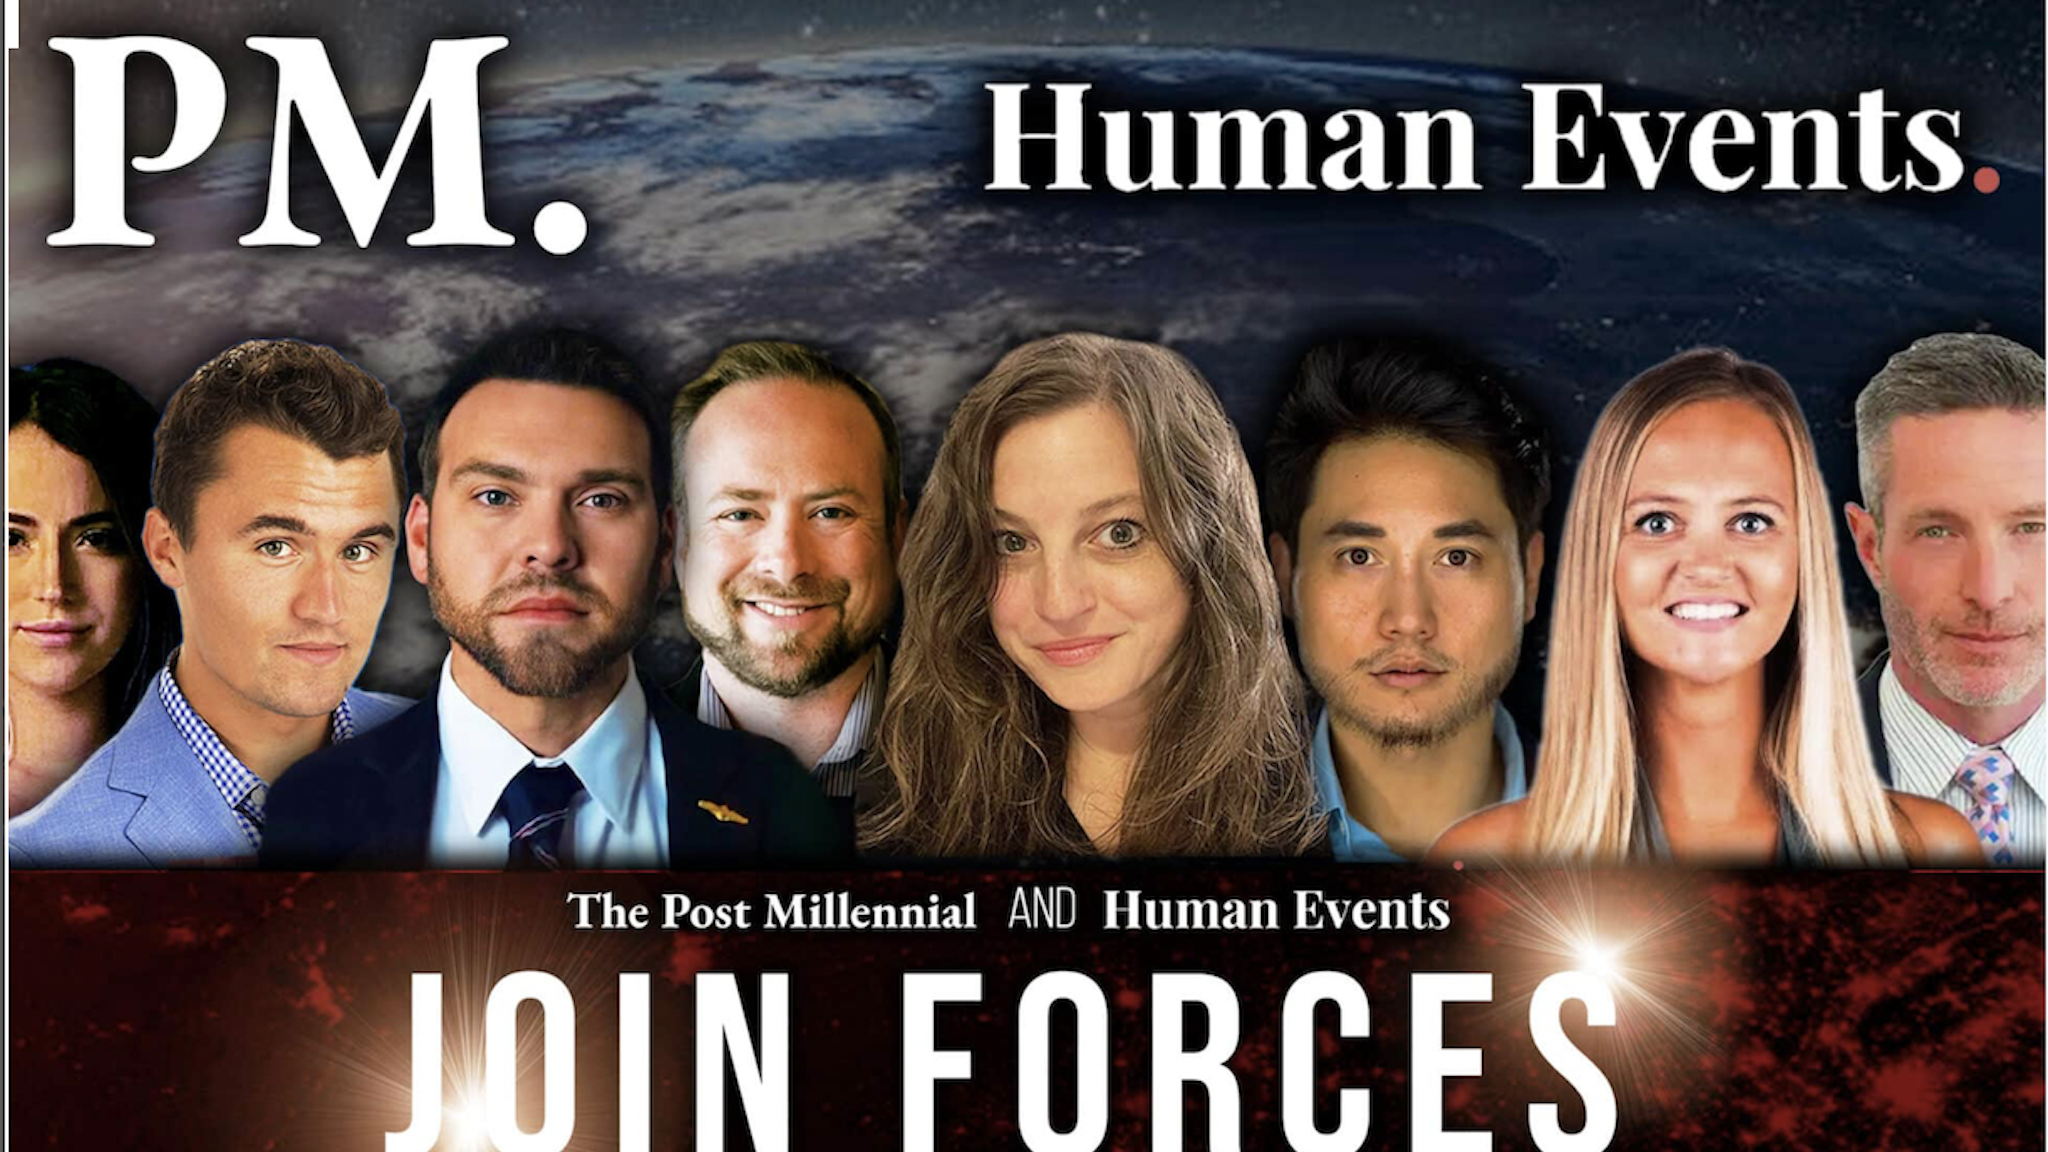 Human Events has acquired The Post Millennial